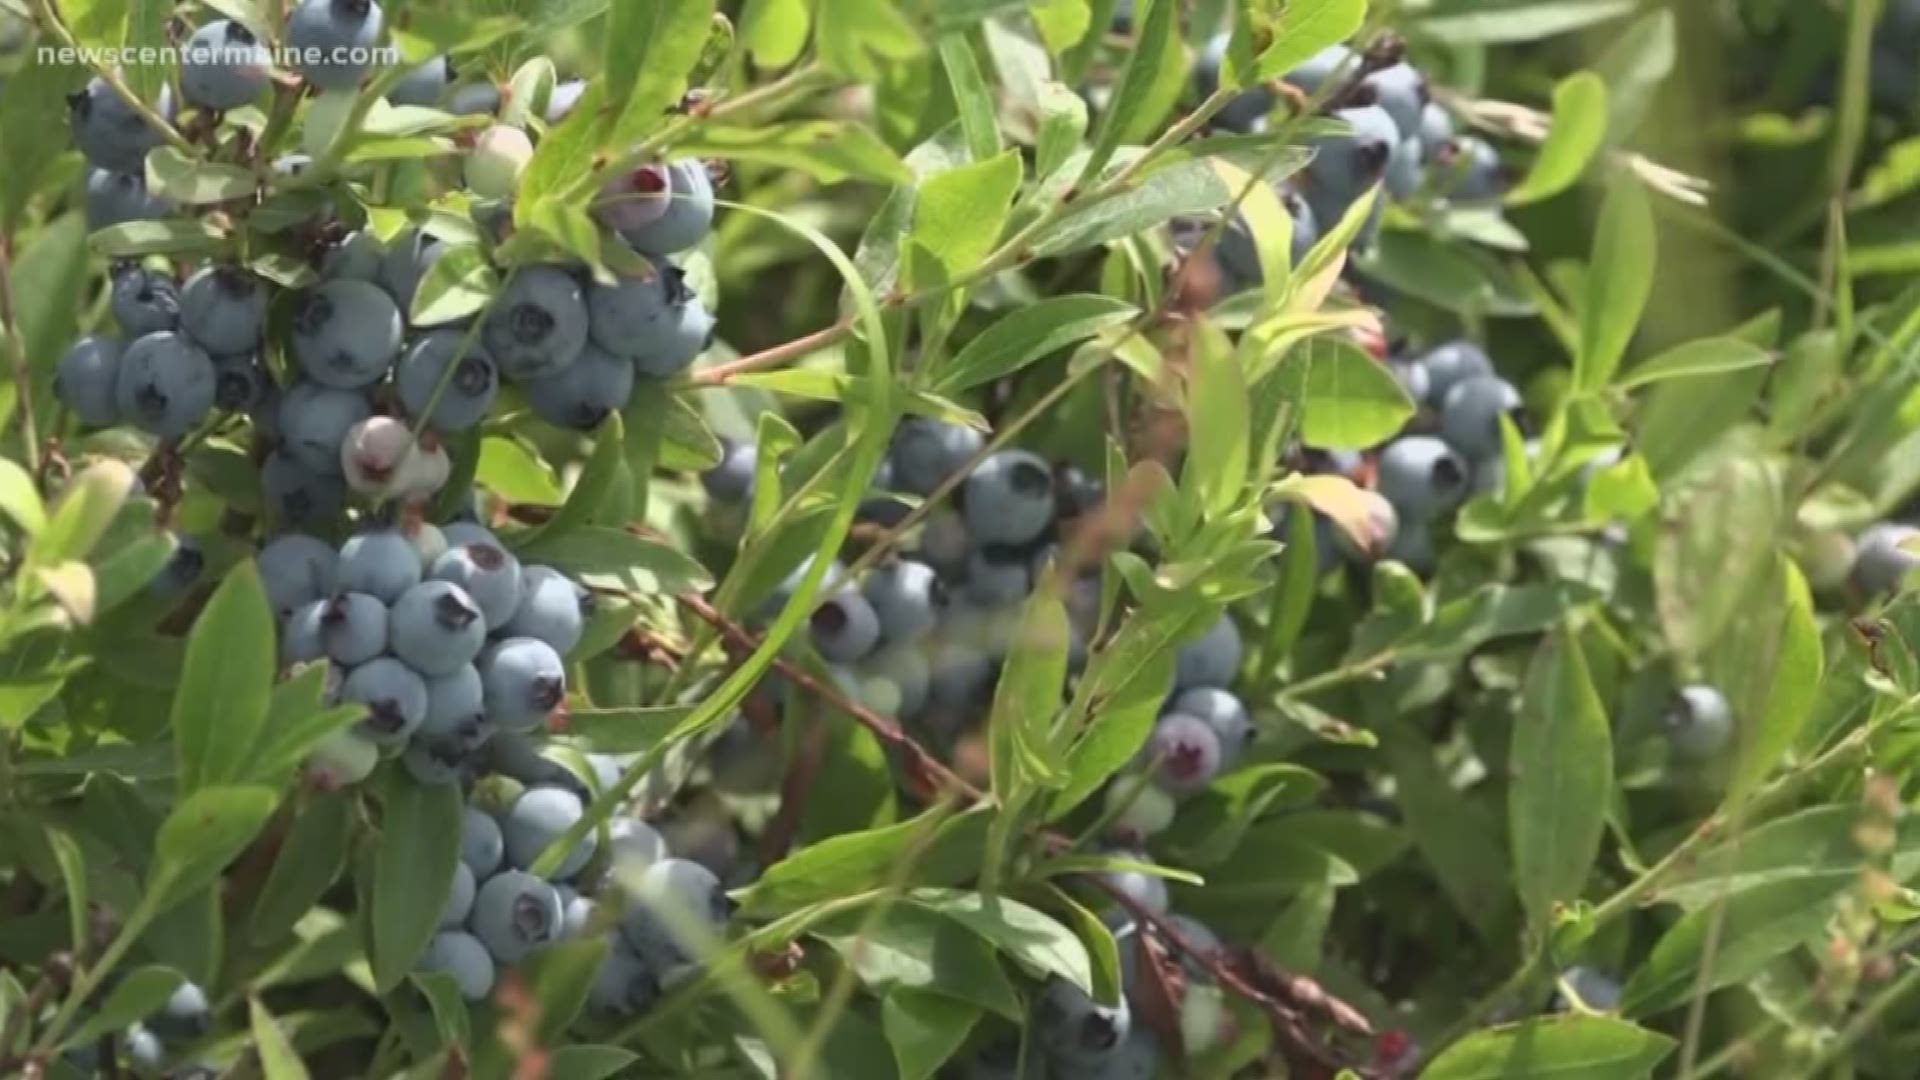 Program unlikely to help Maine's blueberry